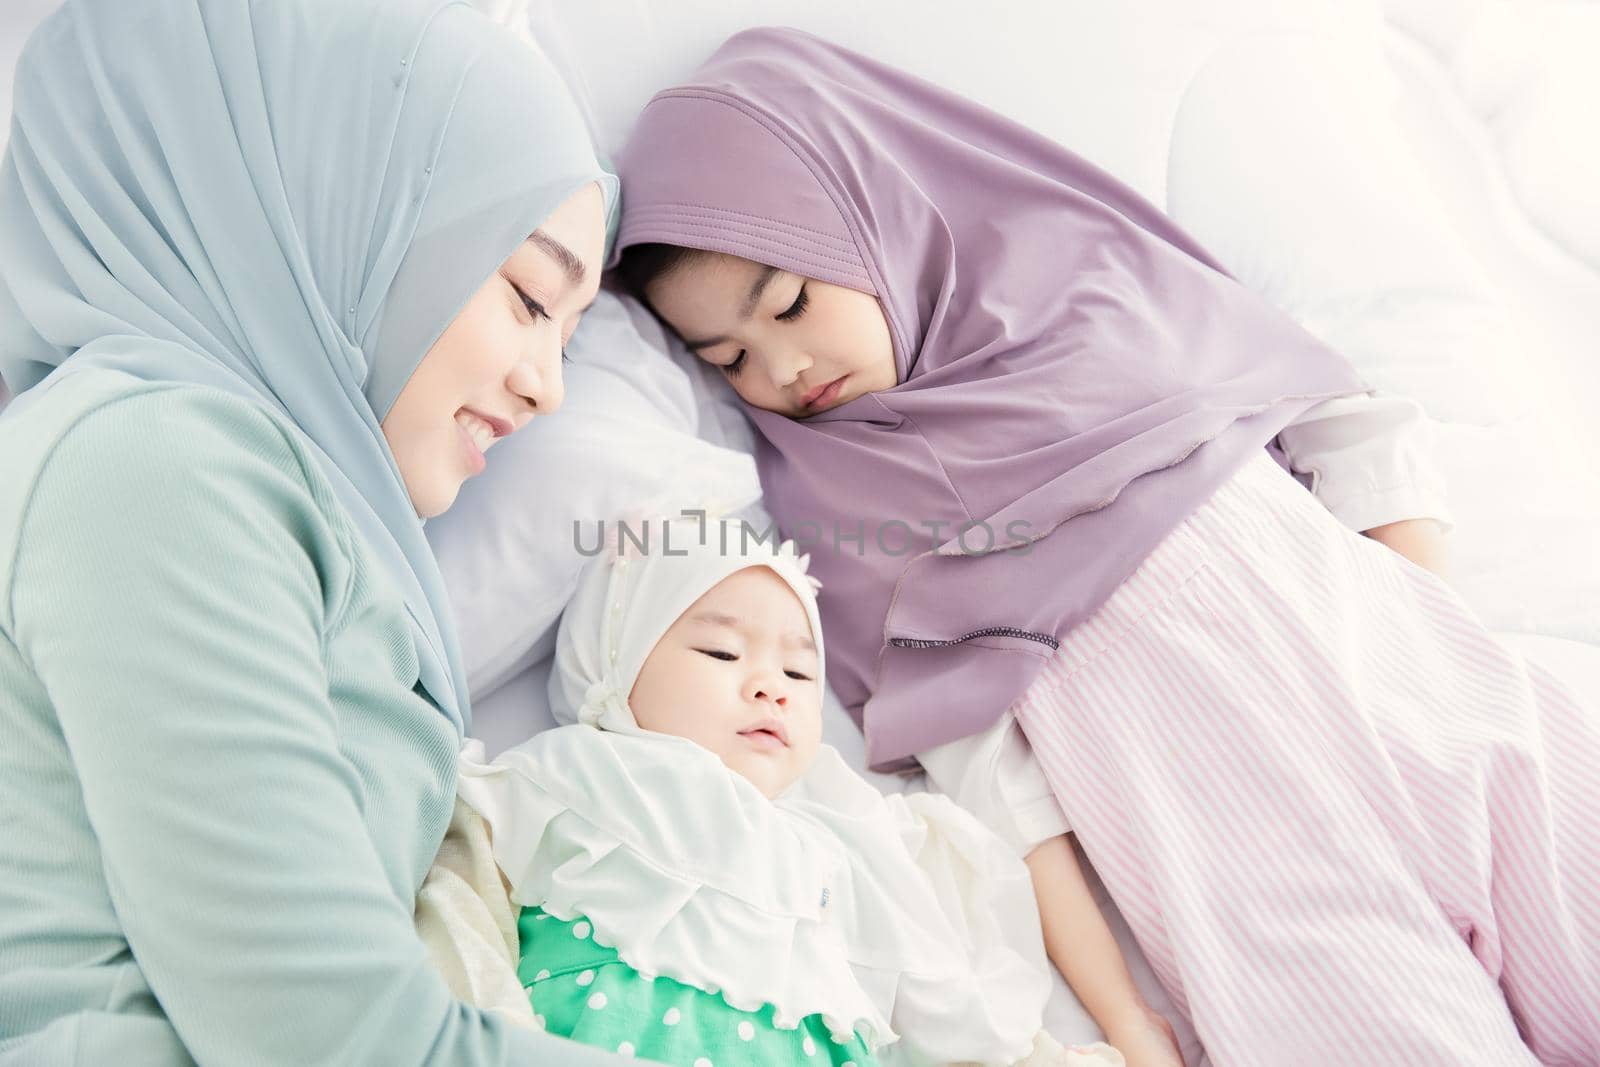 Muslim Hijab mother keep looking and cuddling sleeping baby with love and care on the bed.